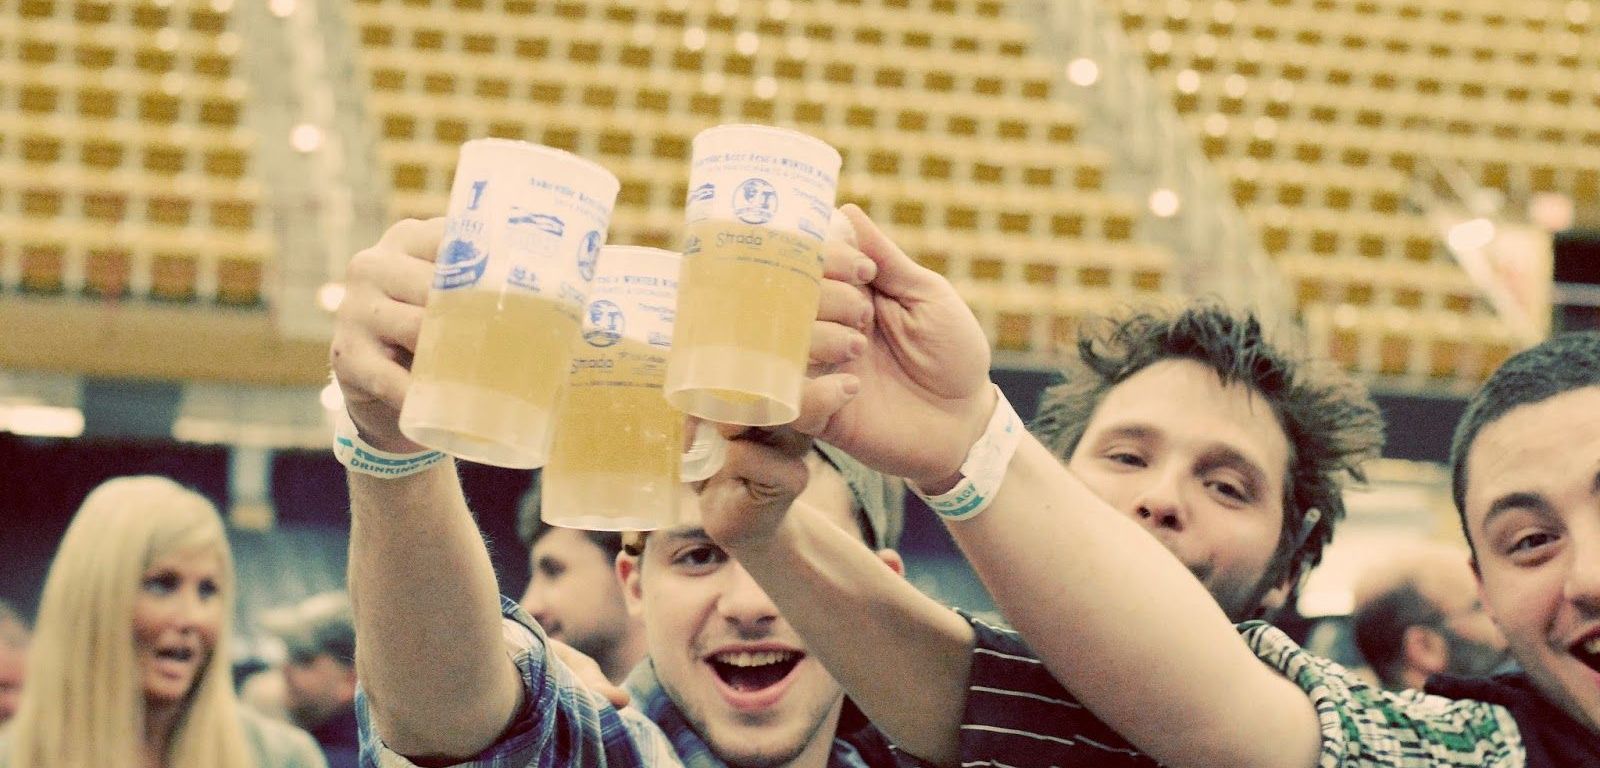 Young white men drinking beer, photo by Crystal Anderson